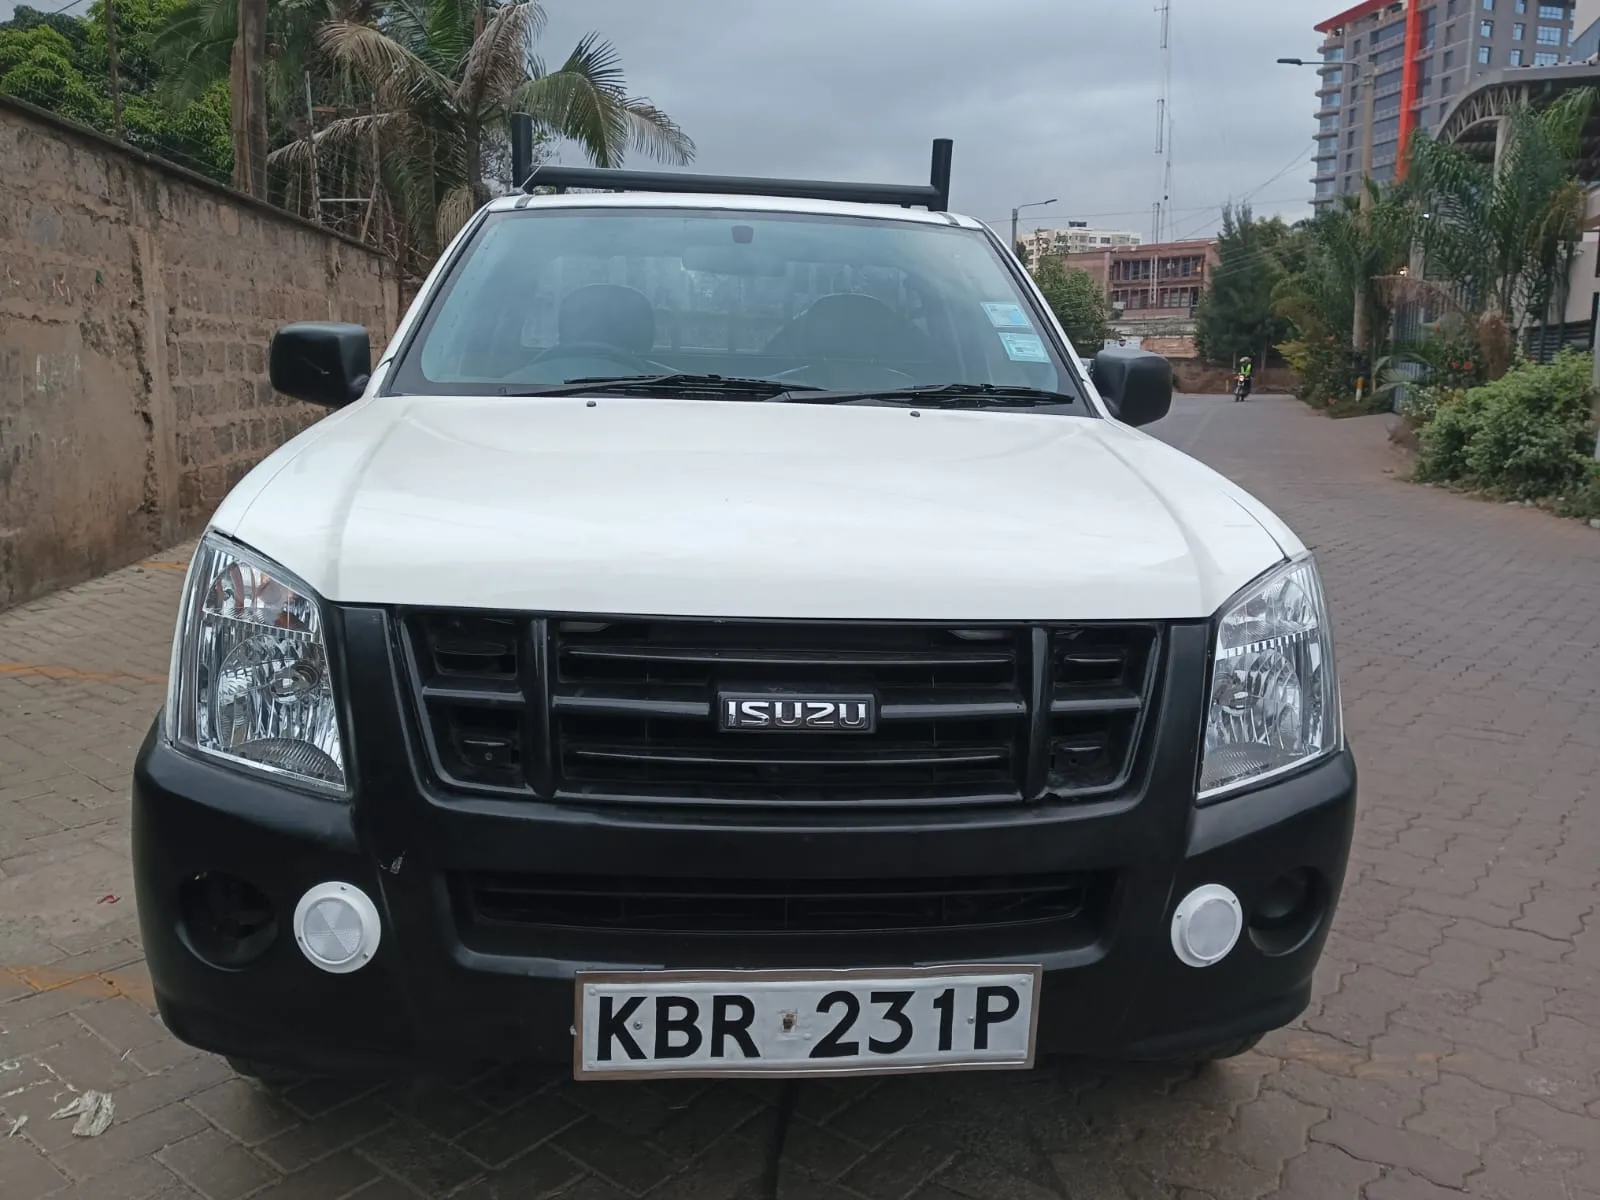 Isuzu D-MAX local 2010 You Pay 20% Deposit ONLY